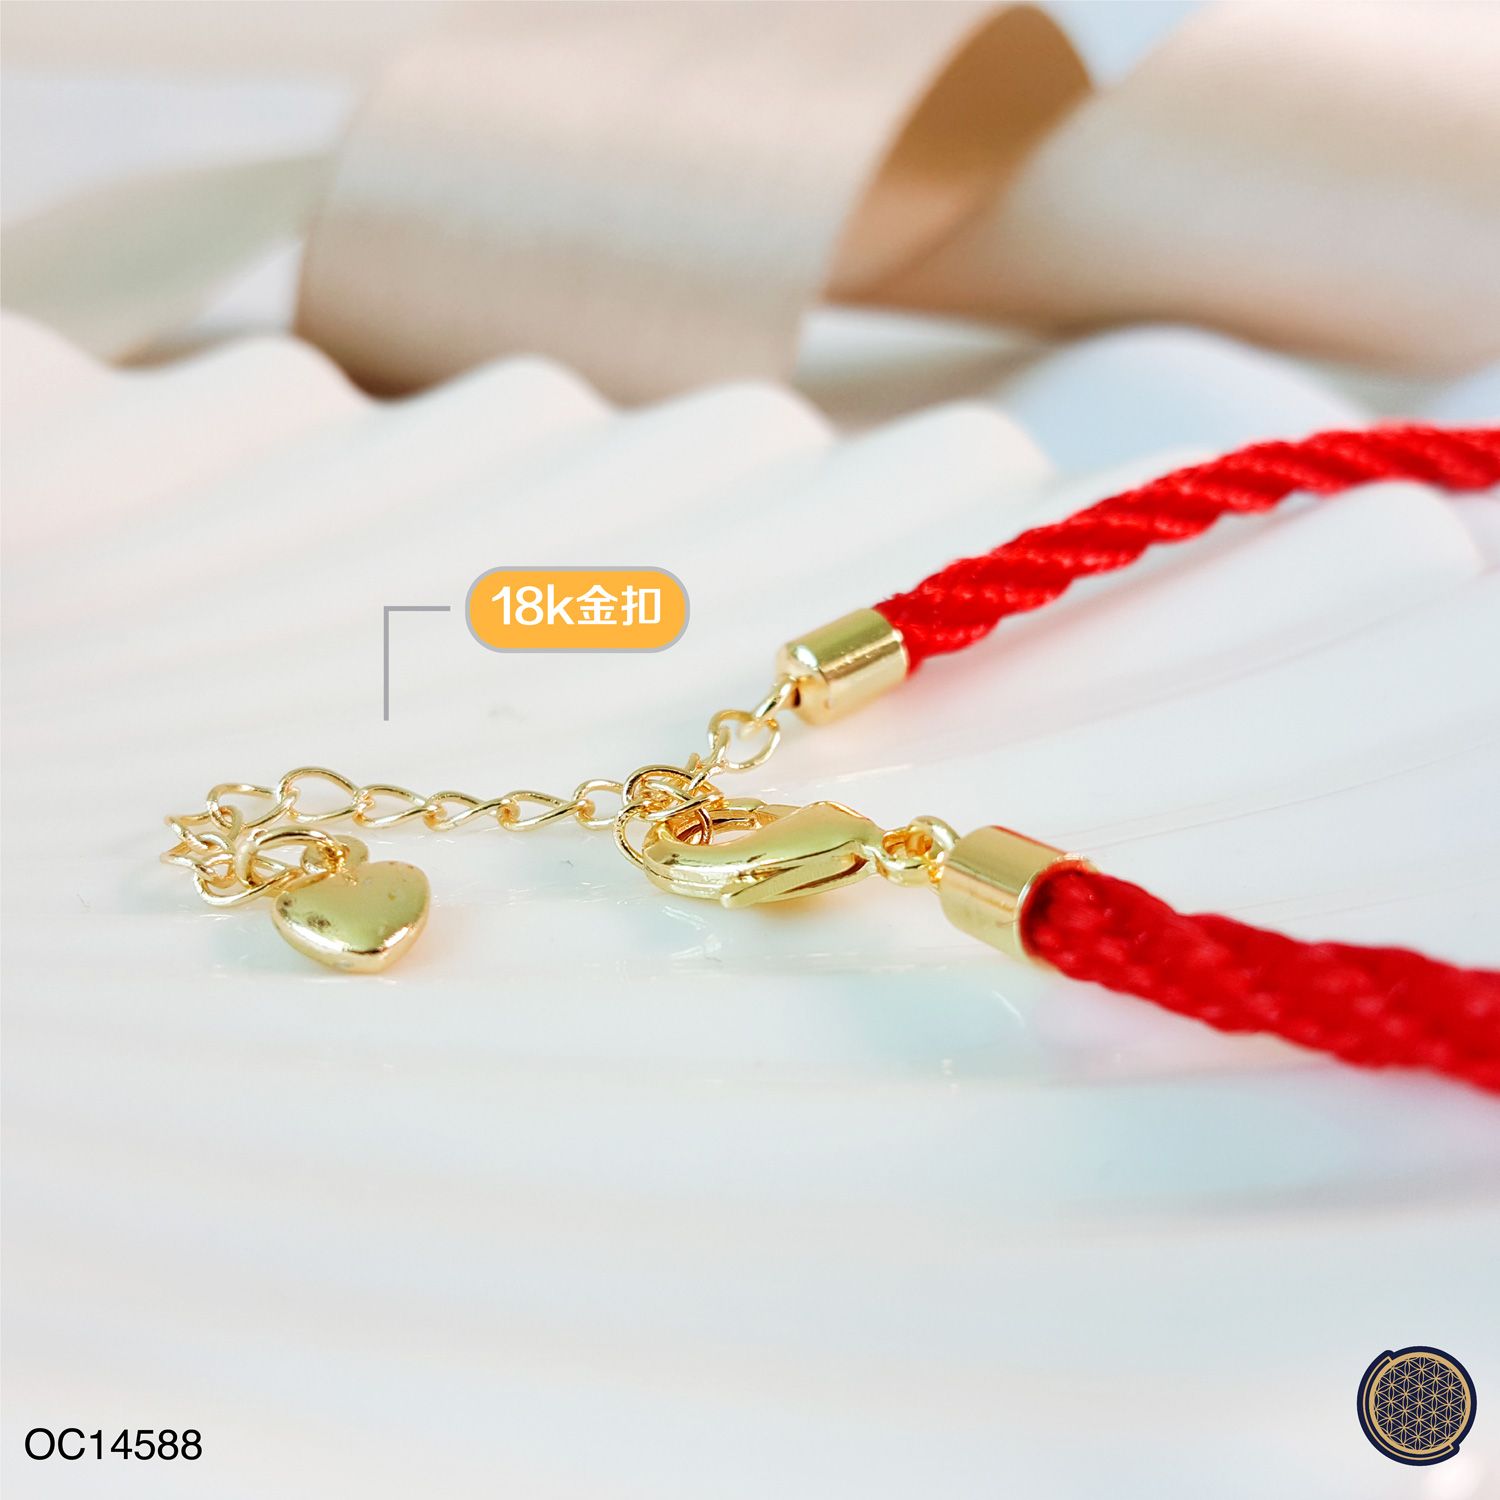 41CM Red Rope With Hook 18K Gold Accessories